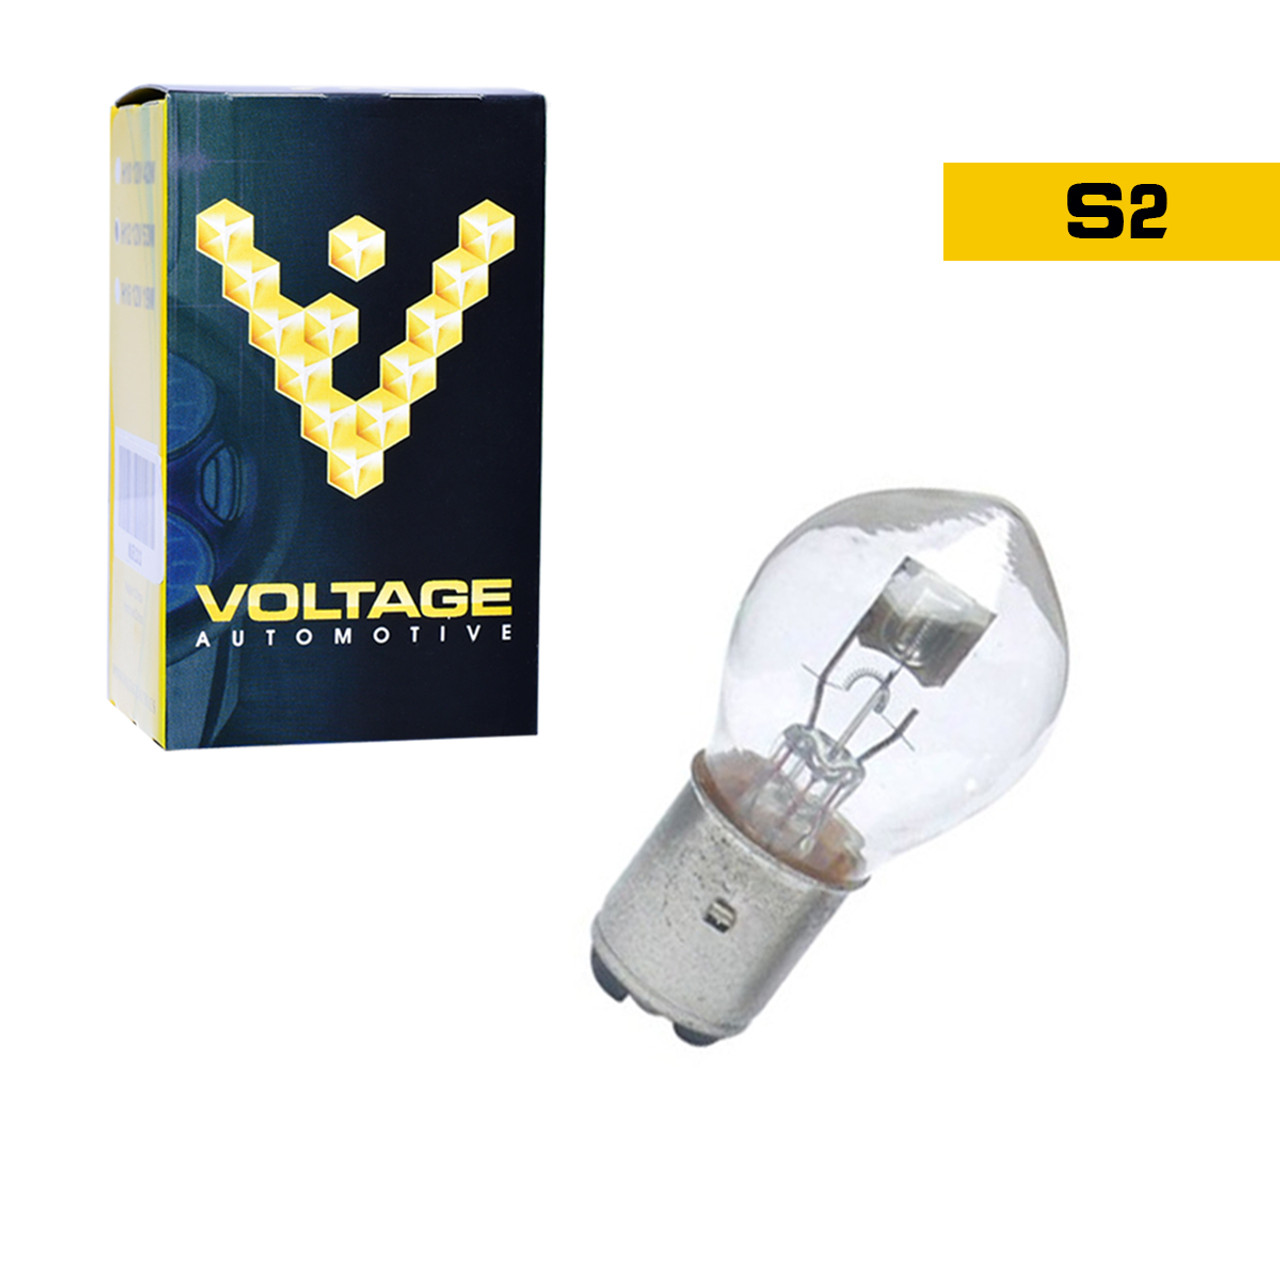 S2 Automotive Headlight Bulb For Motorcycle Scooters Snowmobiles ATVs  Tractors 35/35W